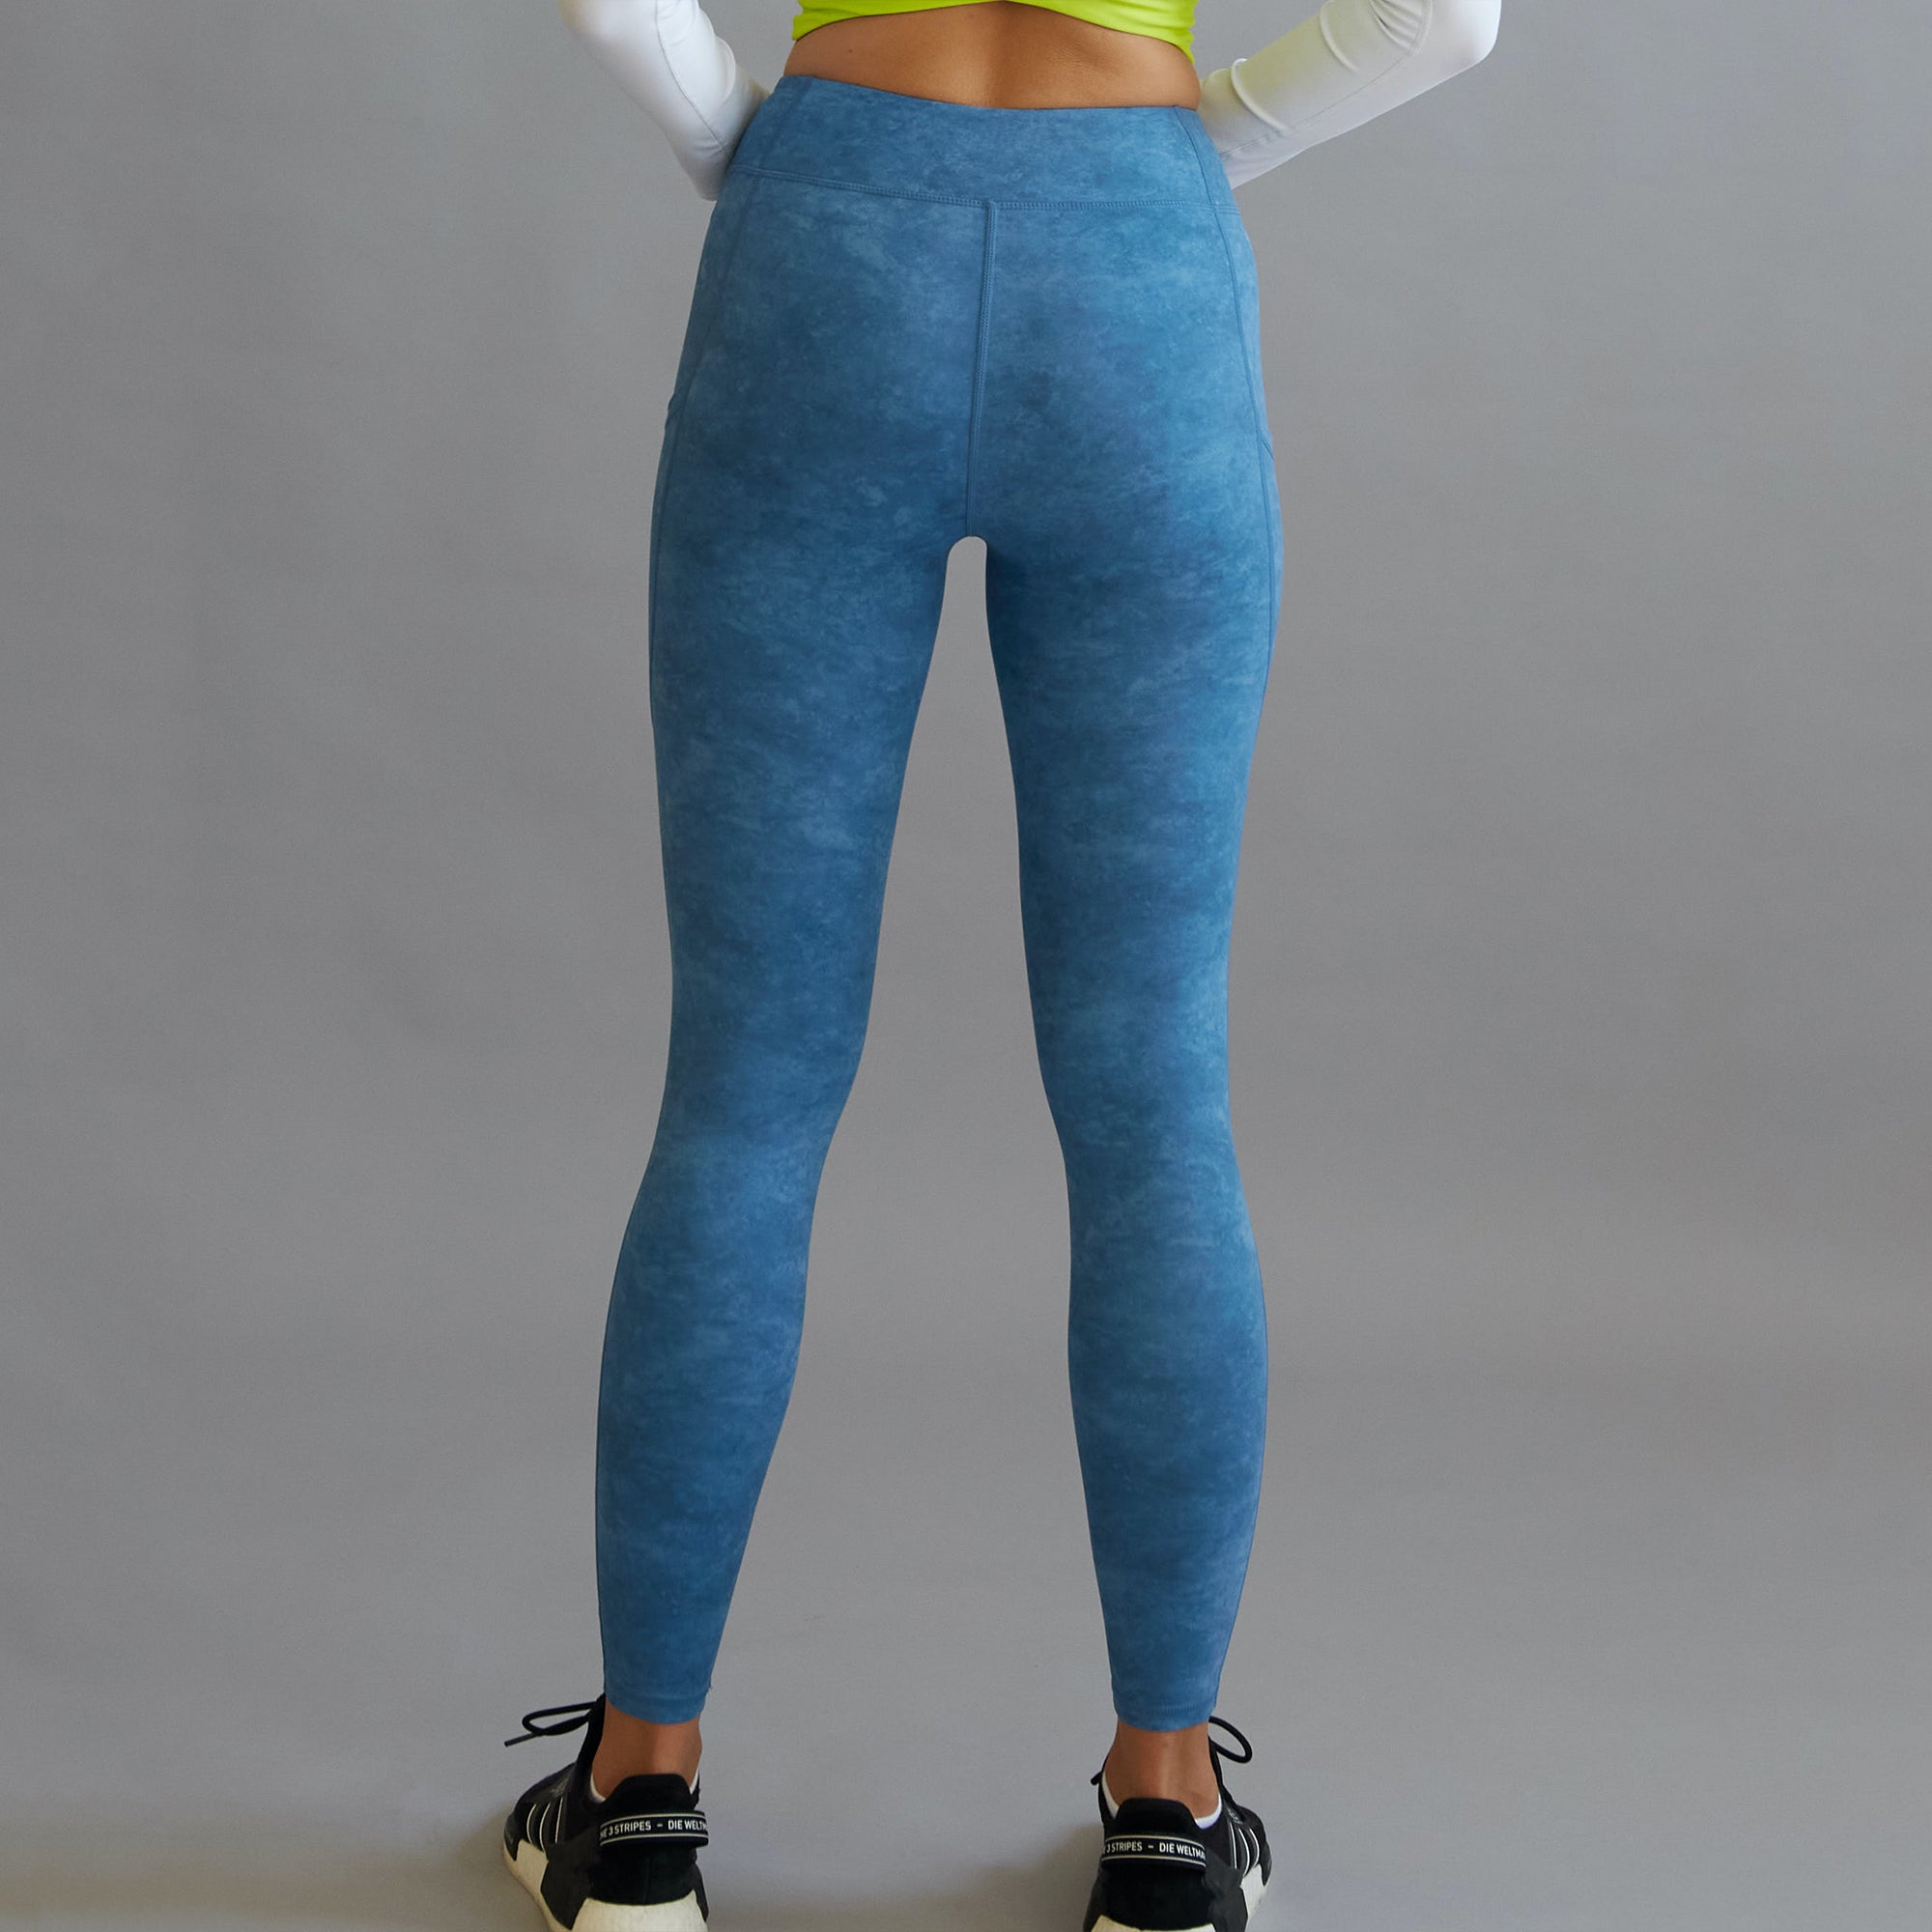 High Waisted Ombre Print Side Striped Sports Leggings